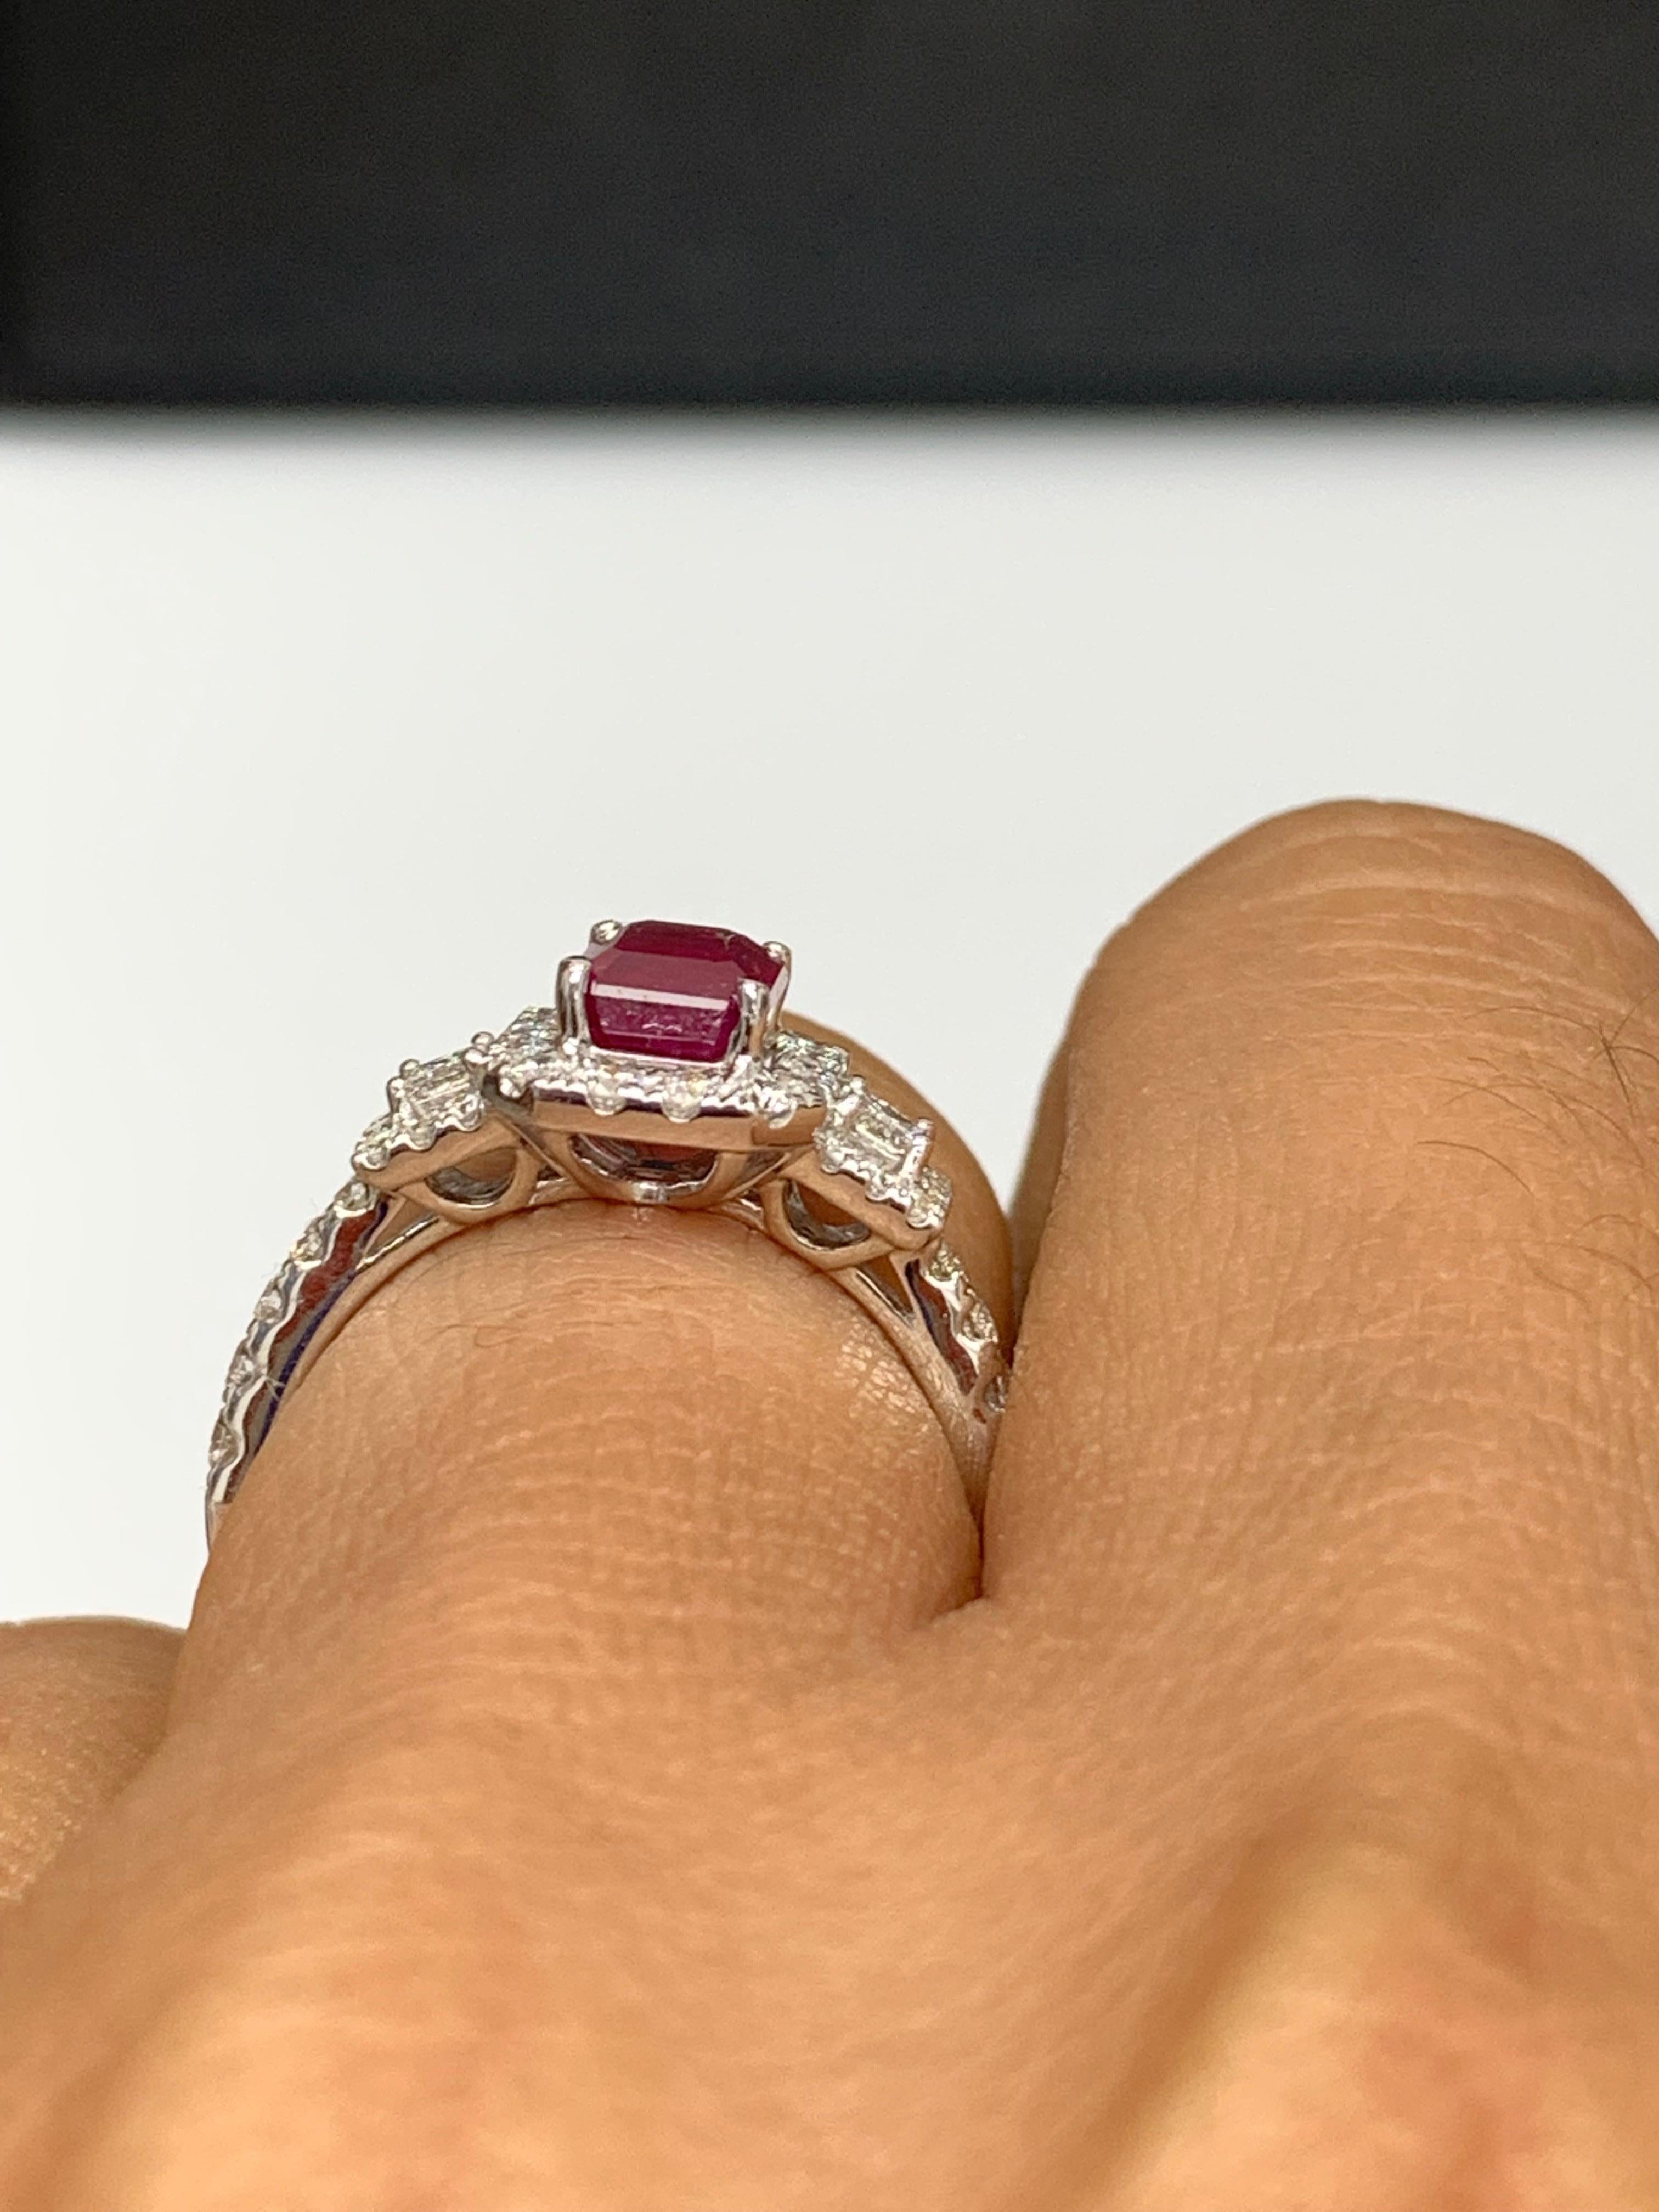 1.43 Carat Emerald Cut Ruby and Diamond Halo Ring in 18K White Gold For Sale 3